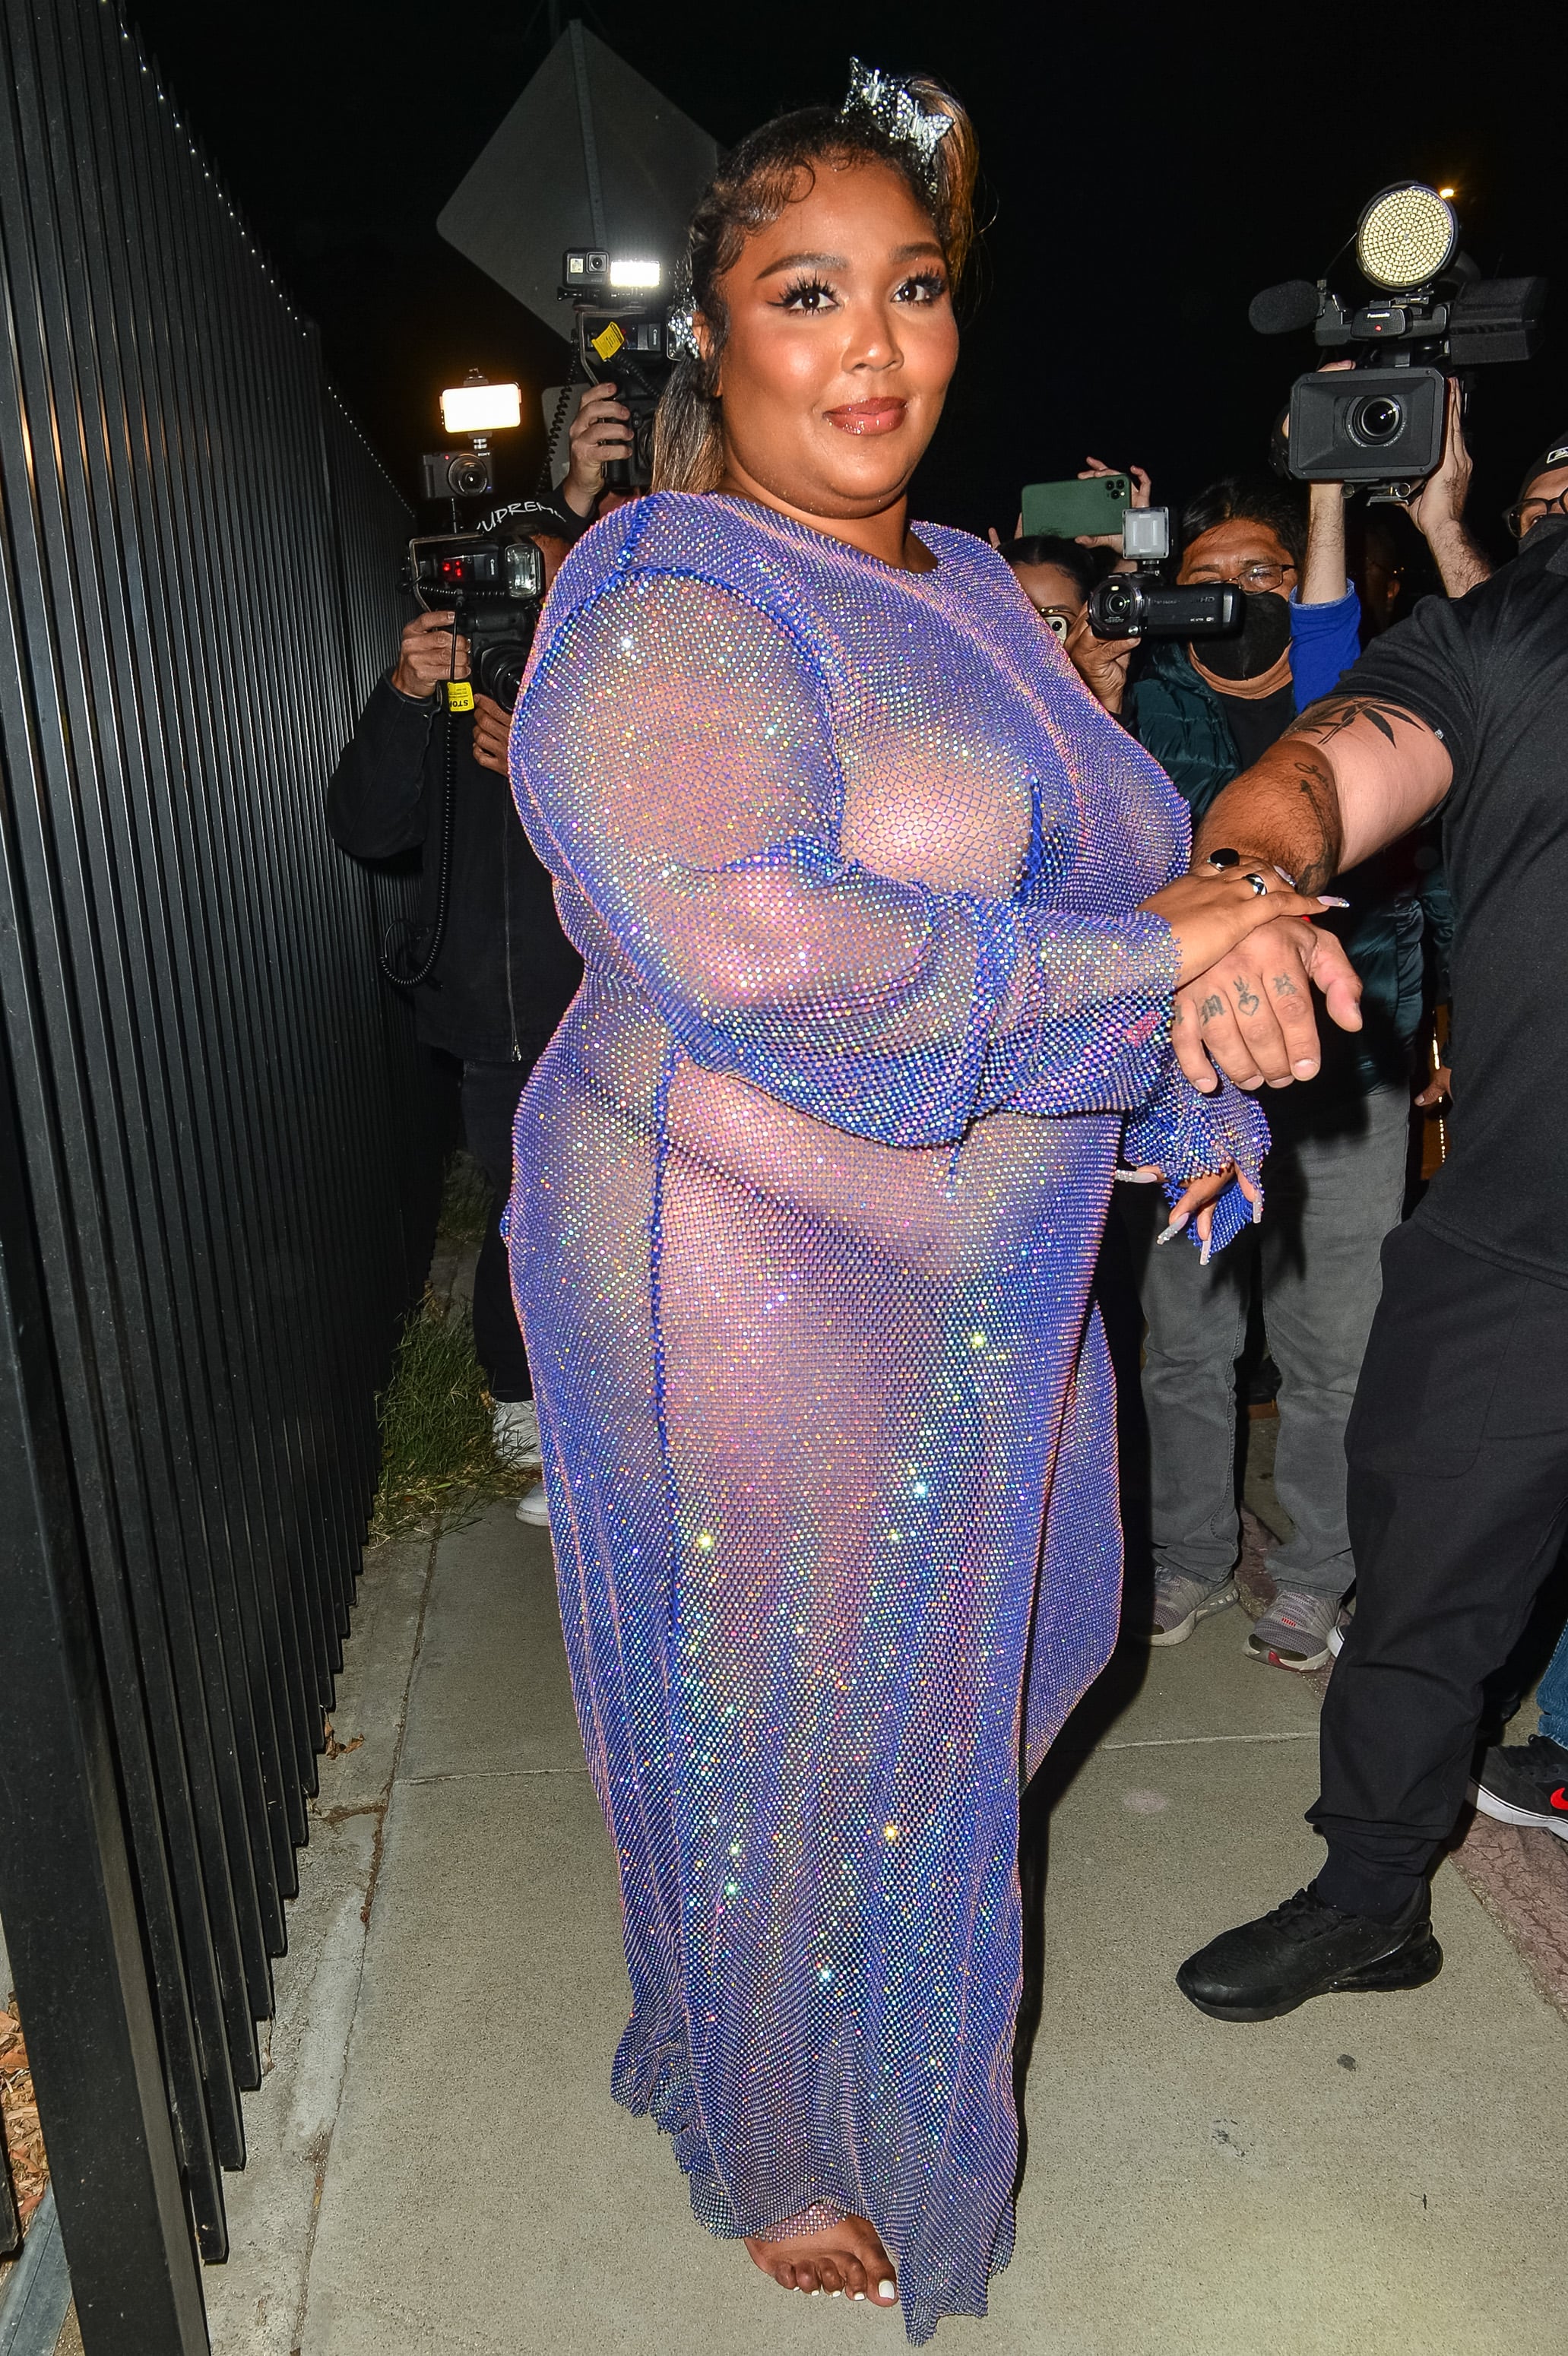 Lizzo Wears Sparkly See-Through Top in an Instagram Video